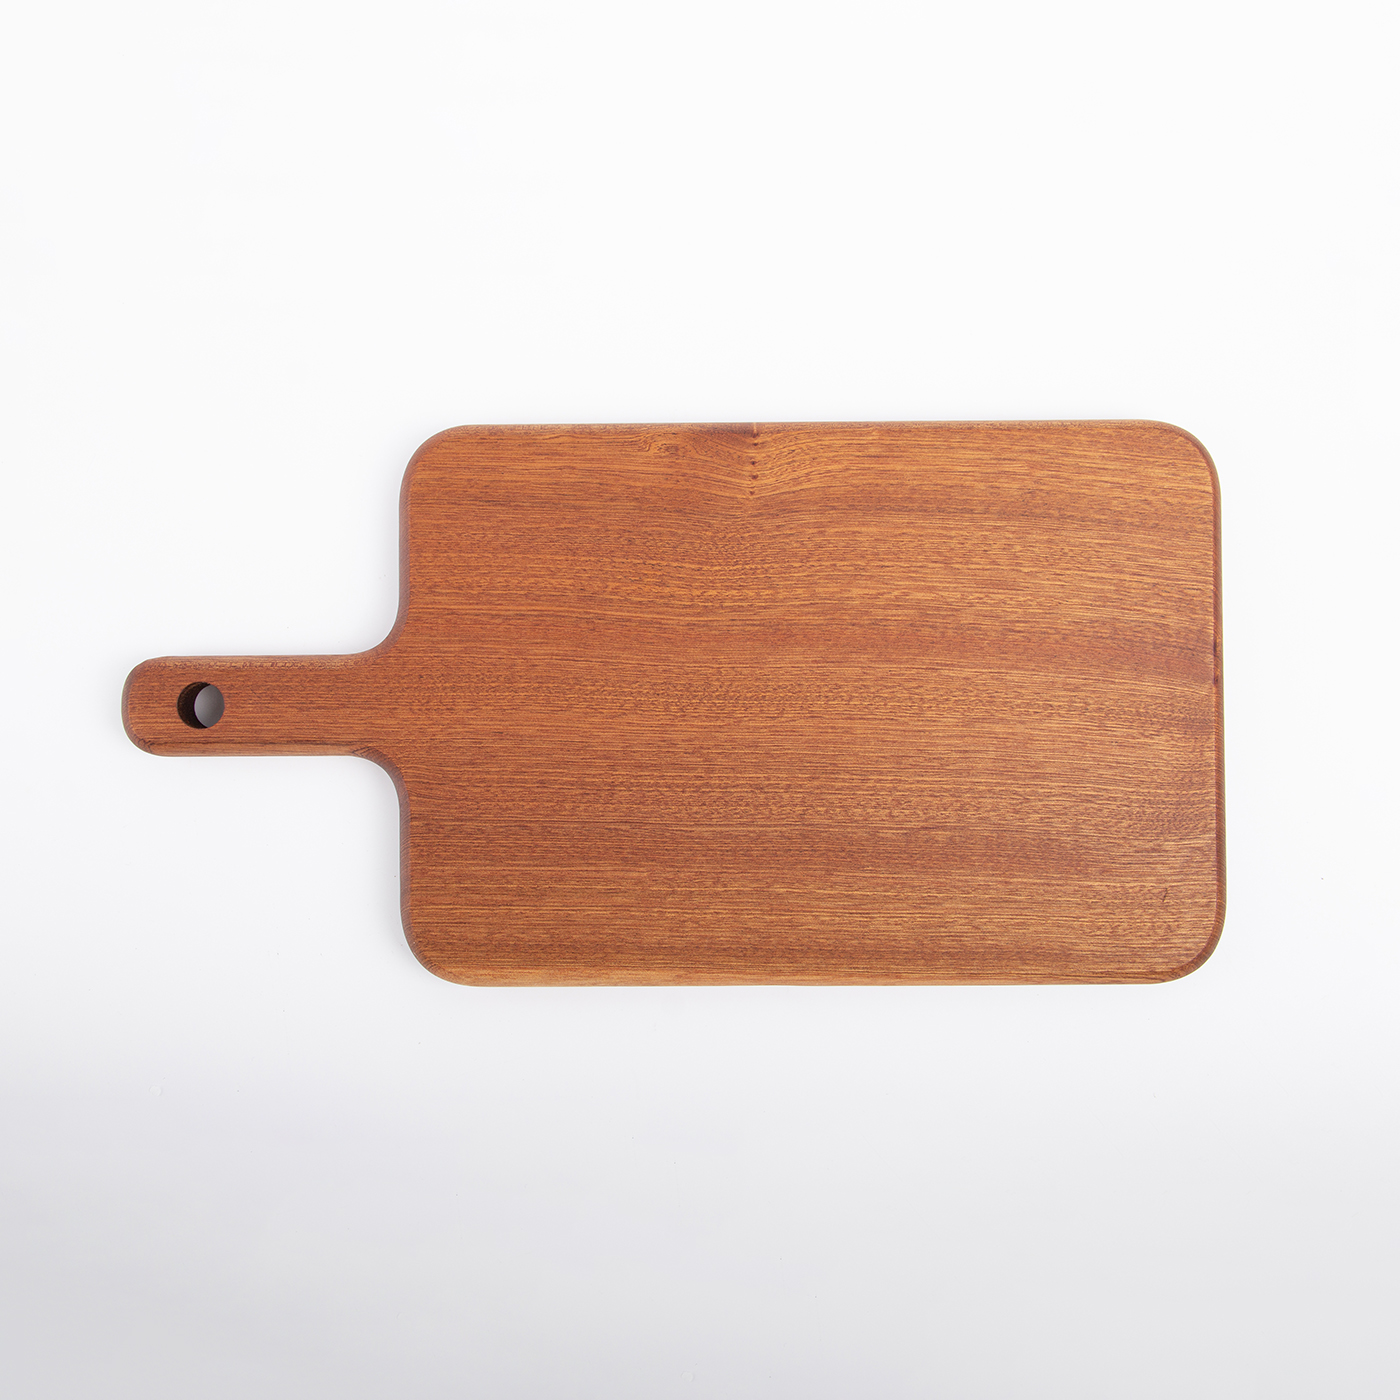 Wooden Chopping Board With Handle2